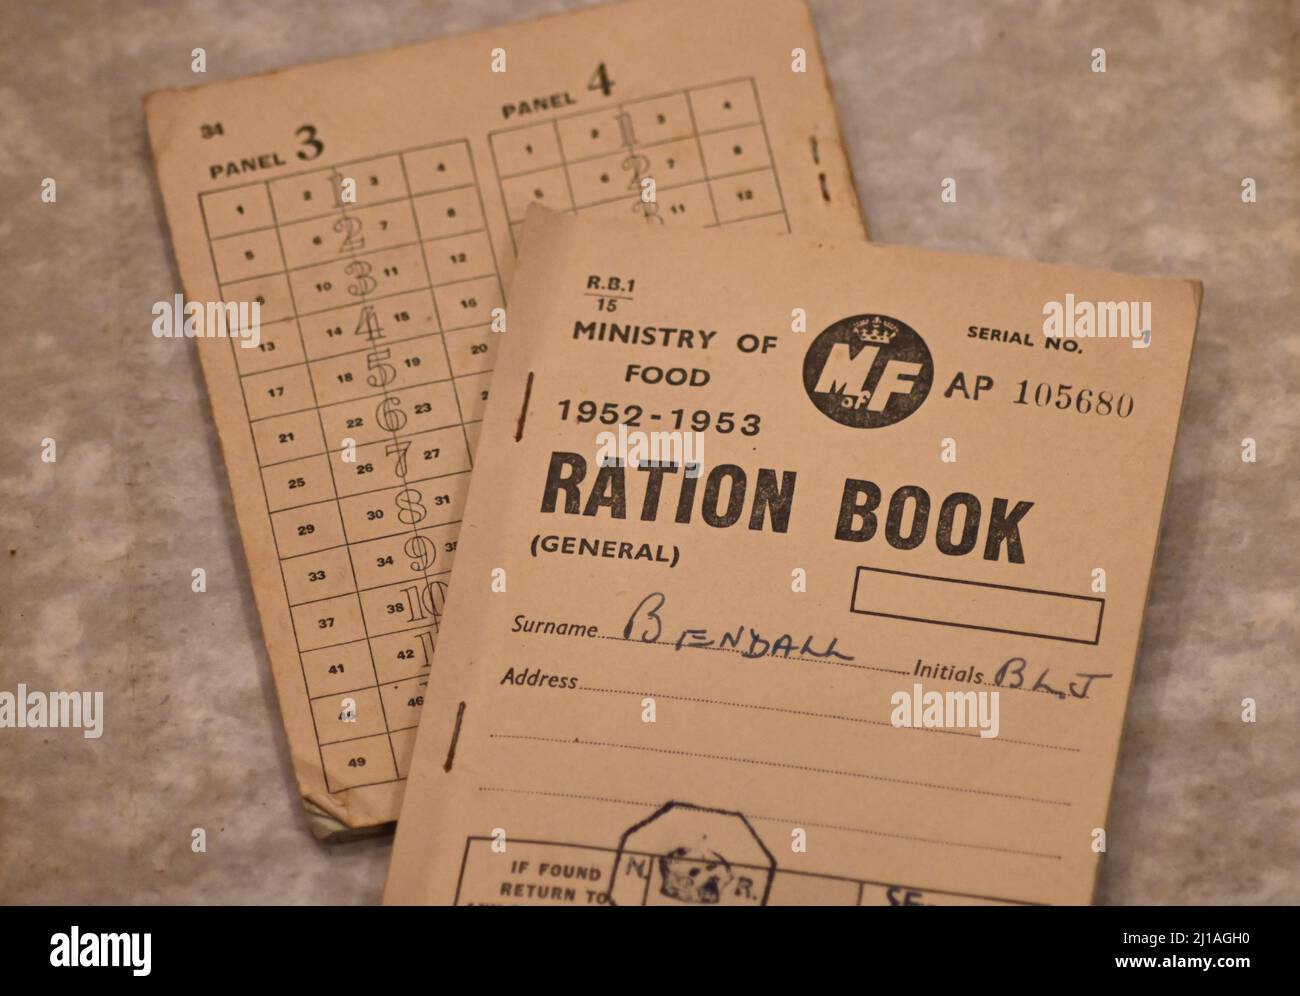 An original Ration Book issued by the Ministry of Food from 1952 to 1953 Stock Photo